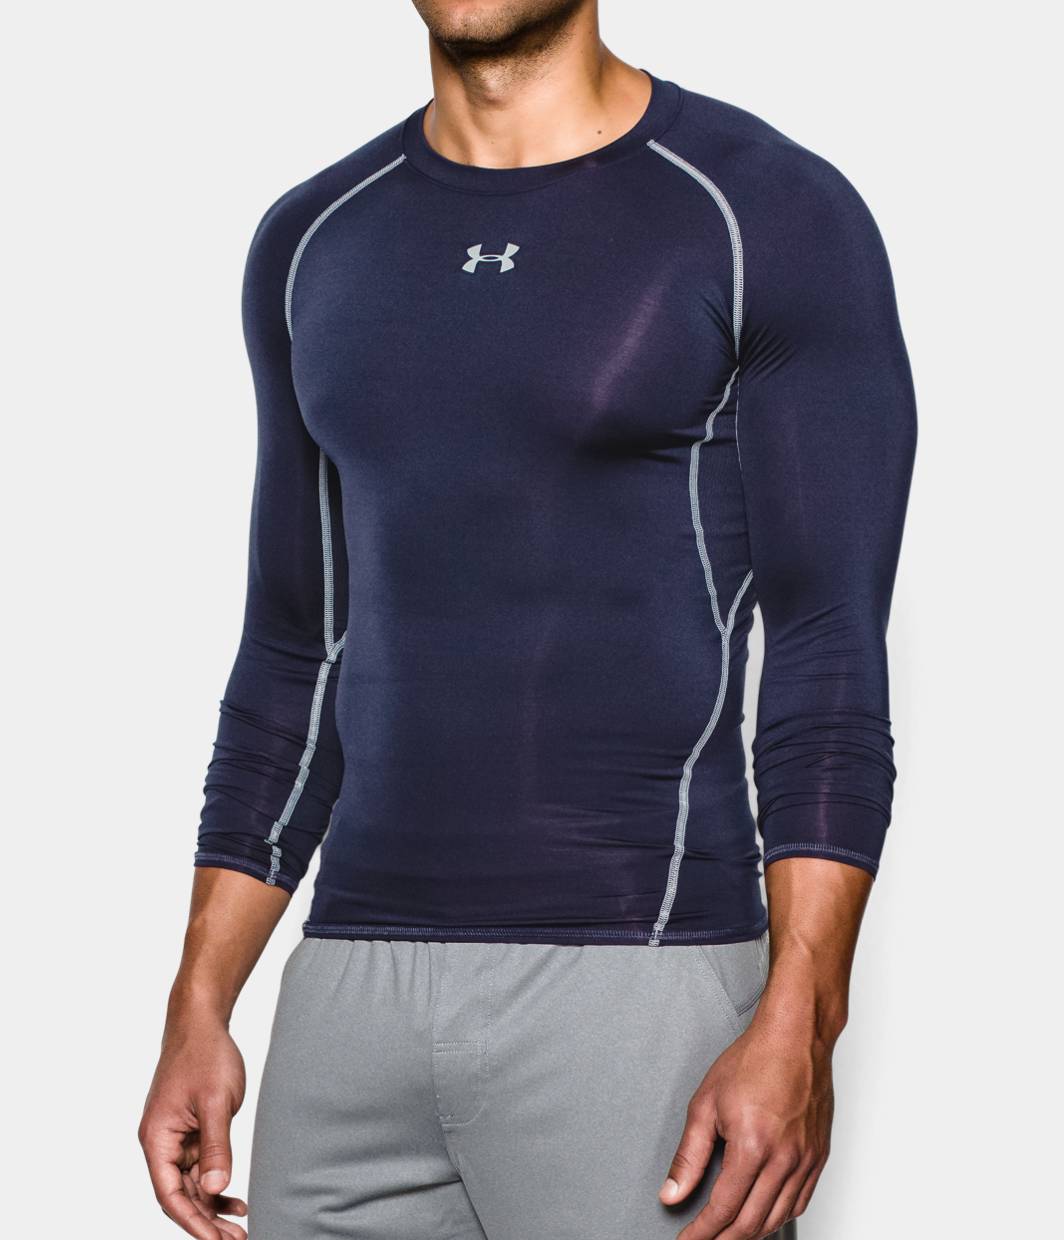 Under Armour Men's HeatGear Armour Long Sleeve Compression Shirt 1257471-410 Midnight Navy - image 4 of 4